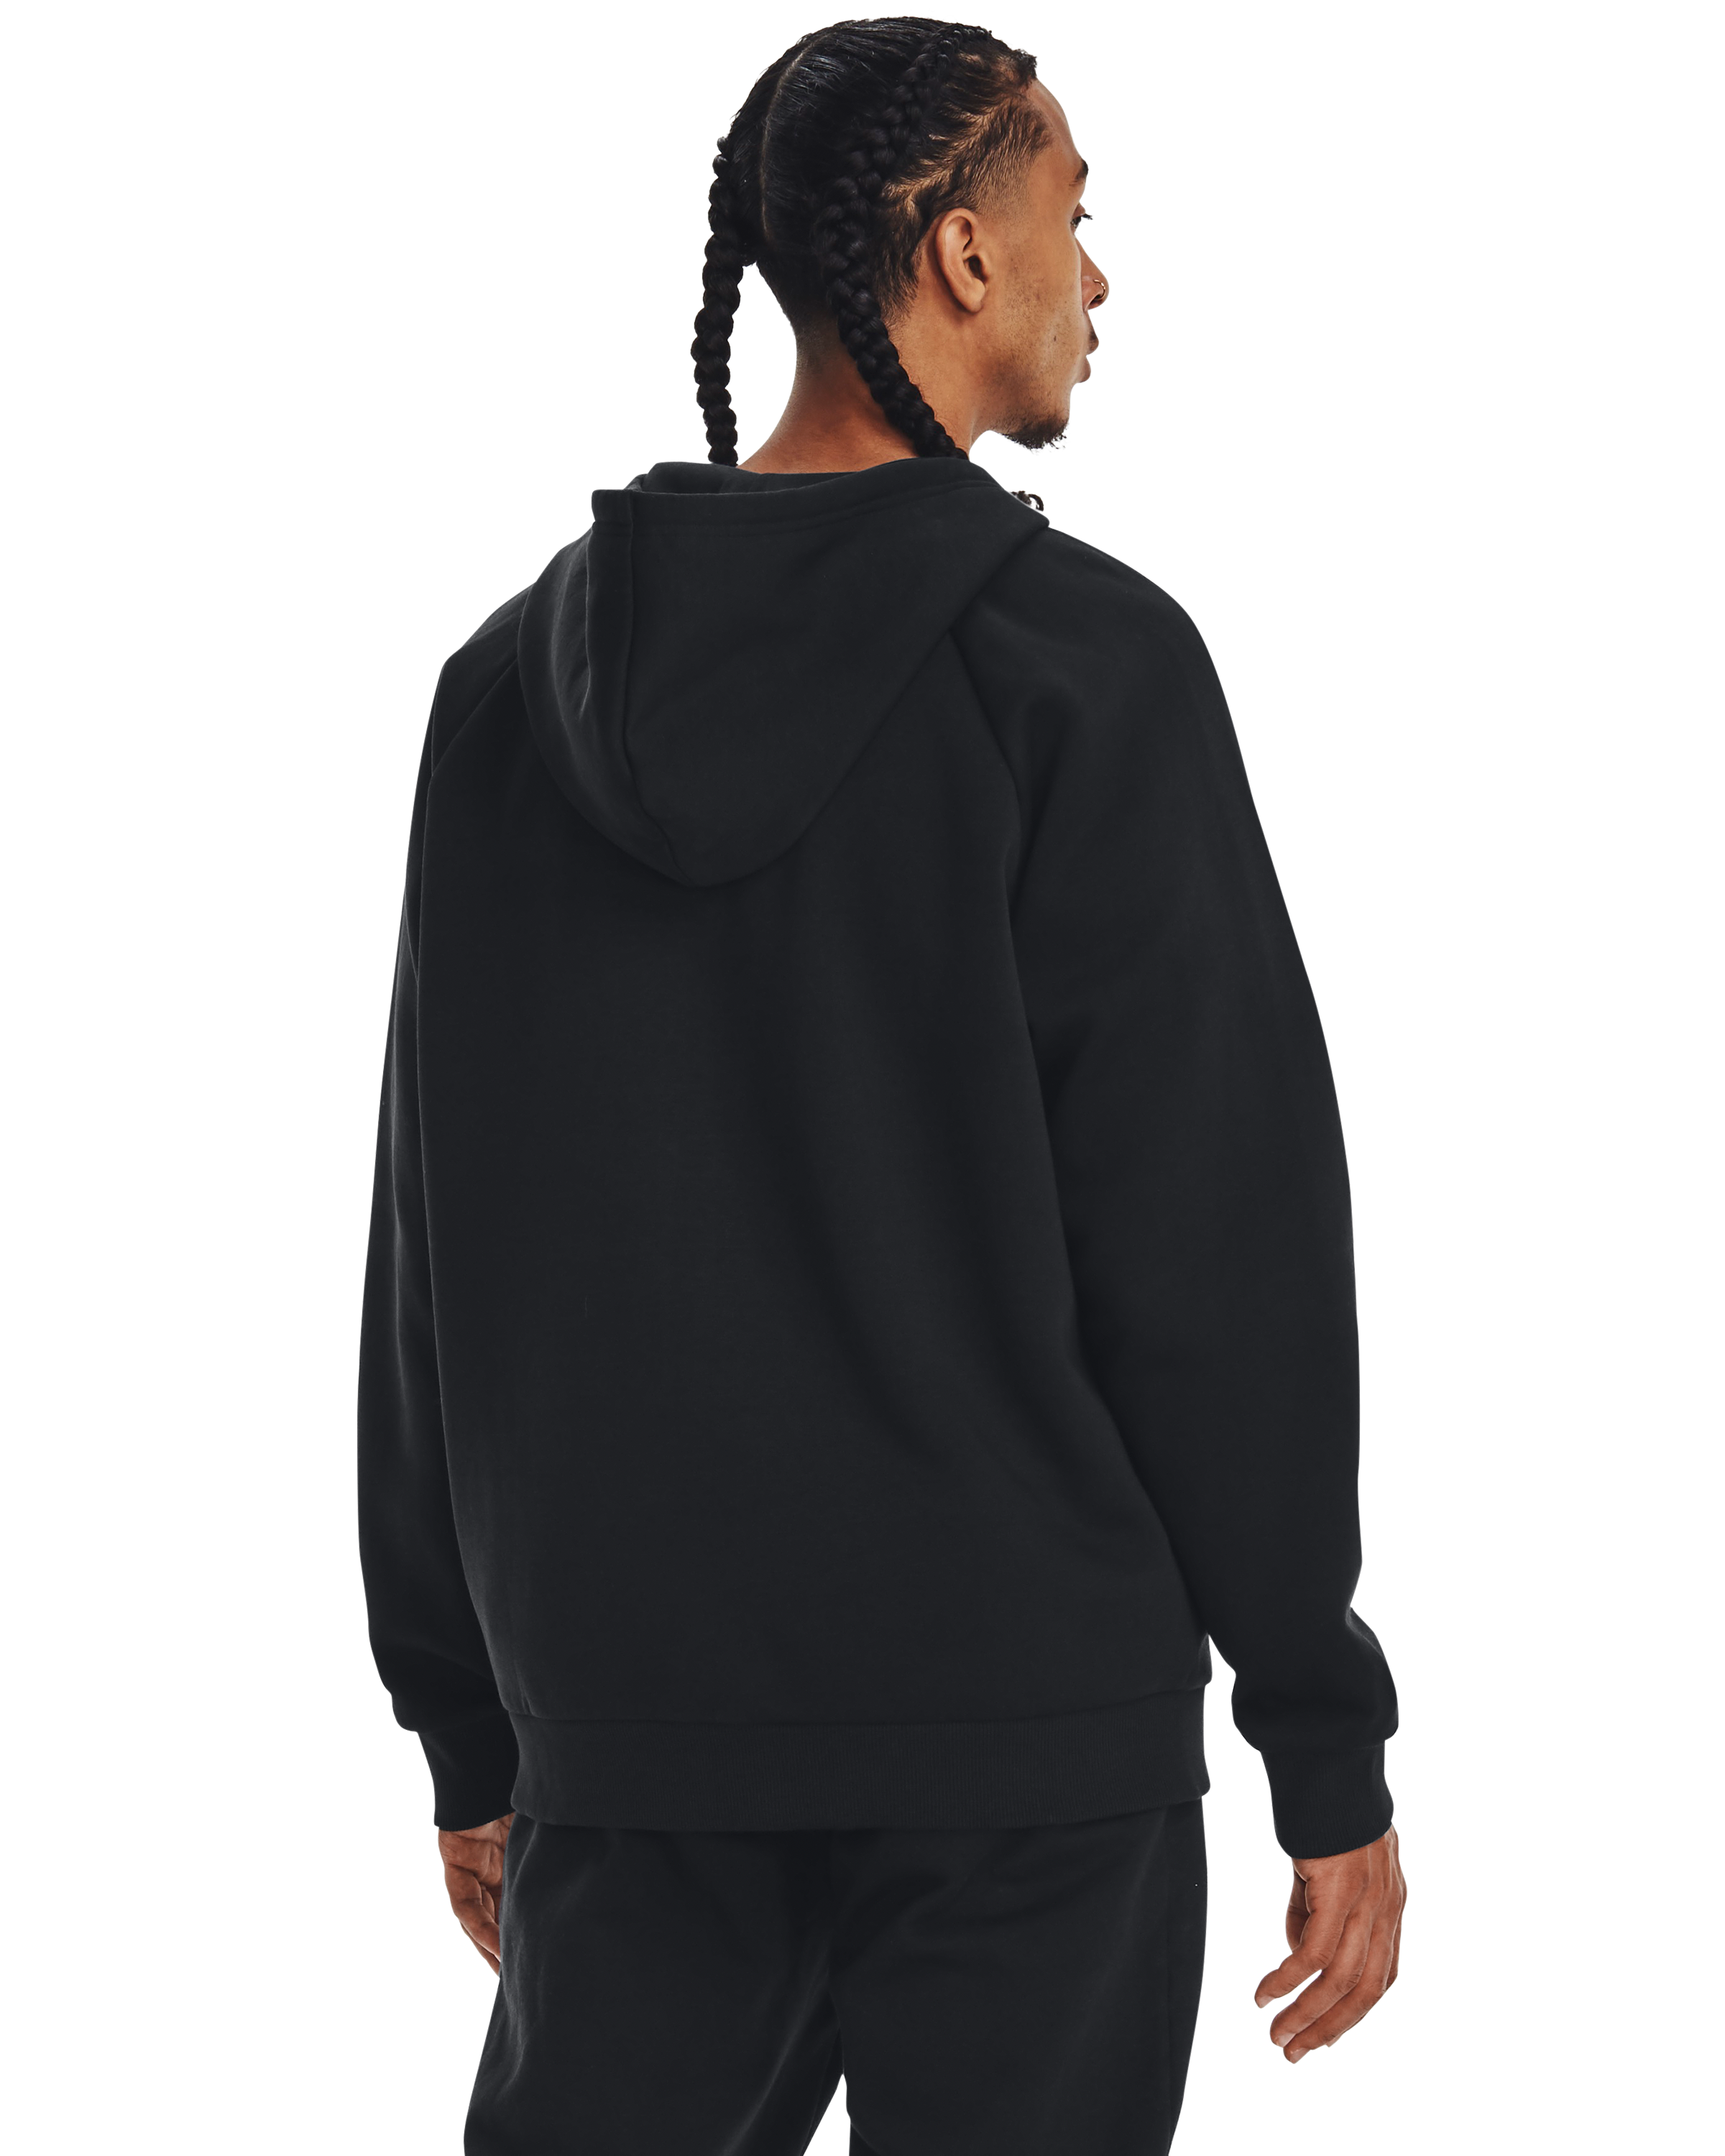 Under Armour Mens Armour Fleece Full-Zip Hoodie - Men from excell